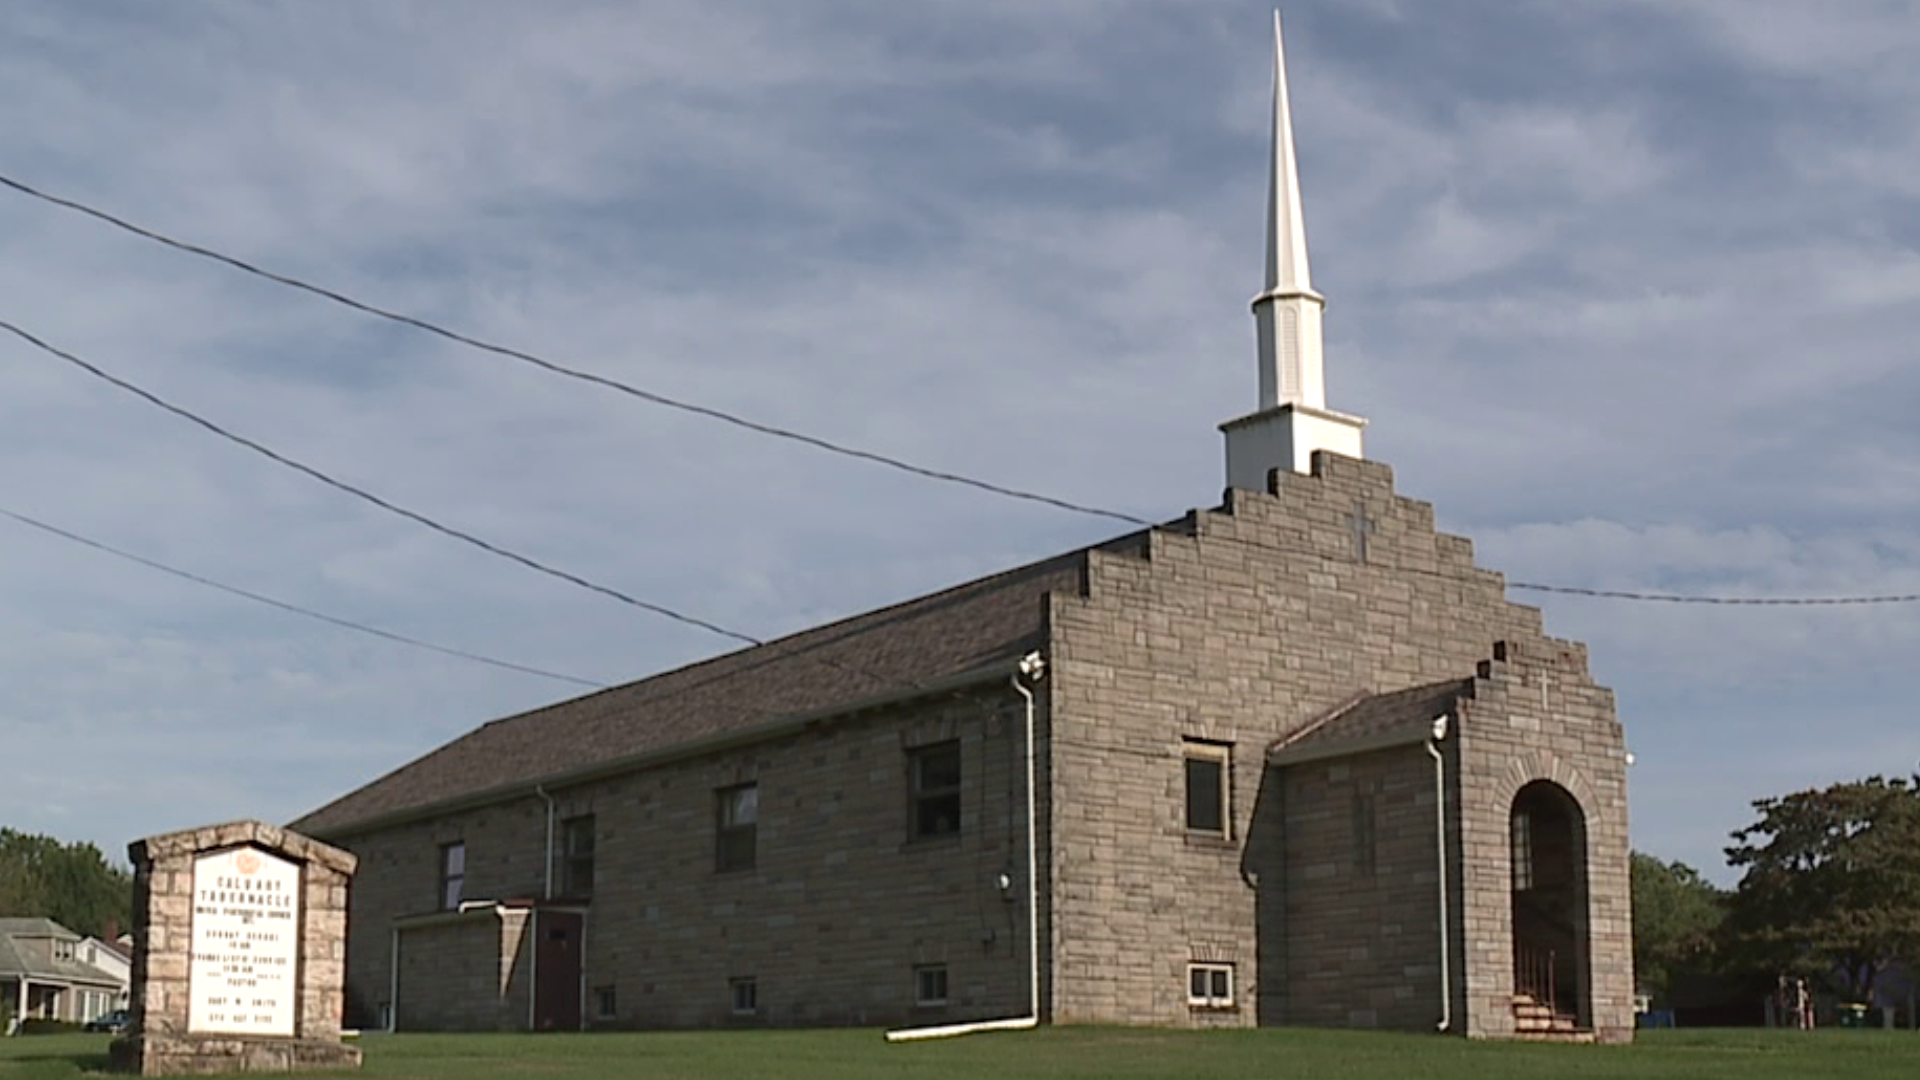 Police said the couple stole more than $8,000 from the church.